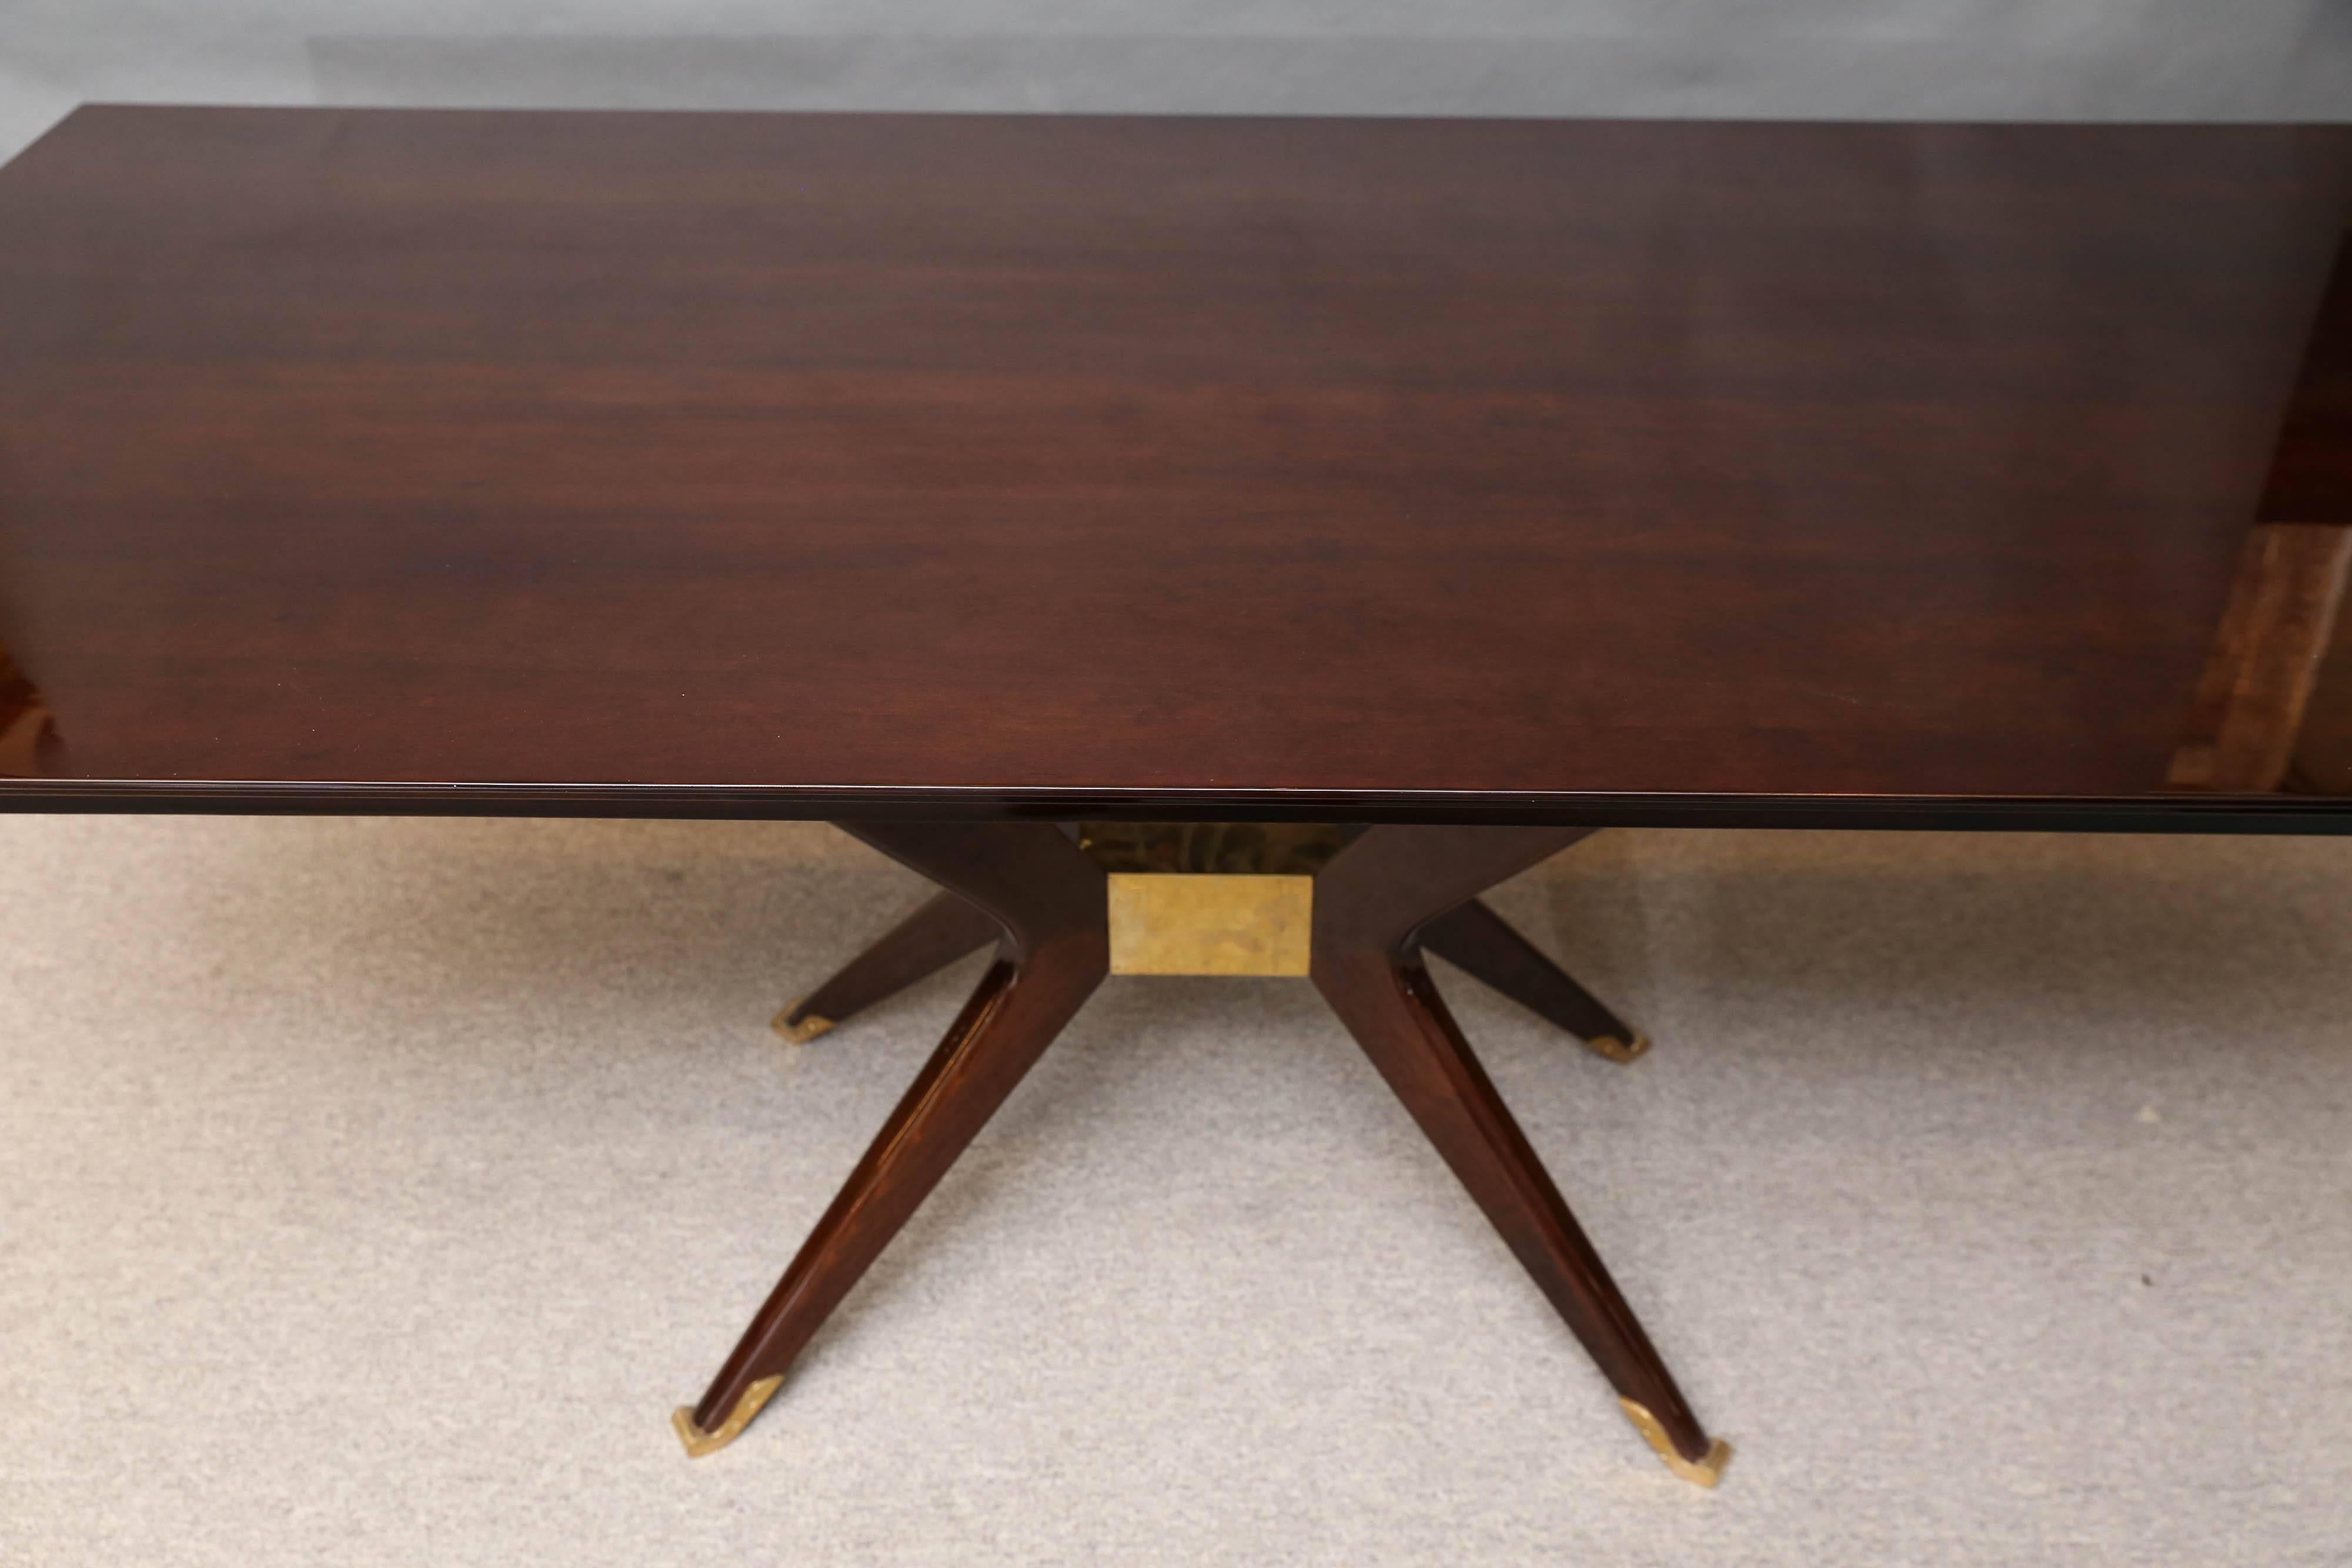 Highly polished palisander table. Resting on four boomerang shaped legs. The legs are connected to a brass 